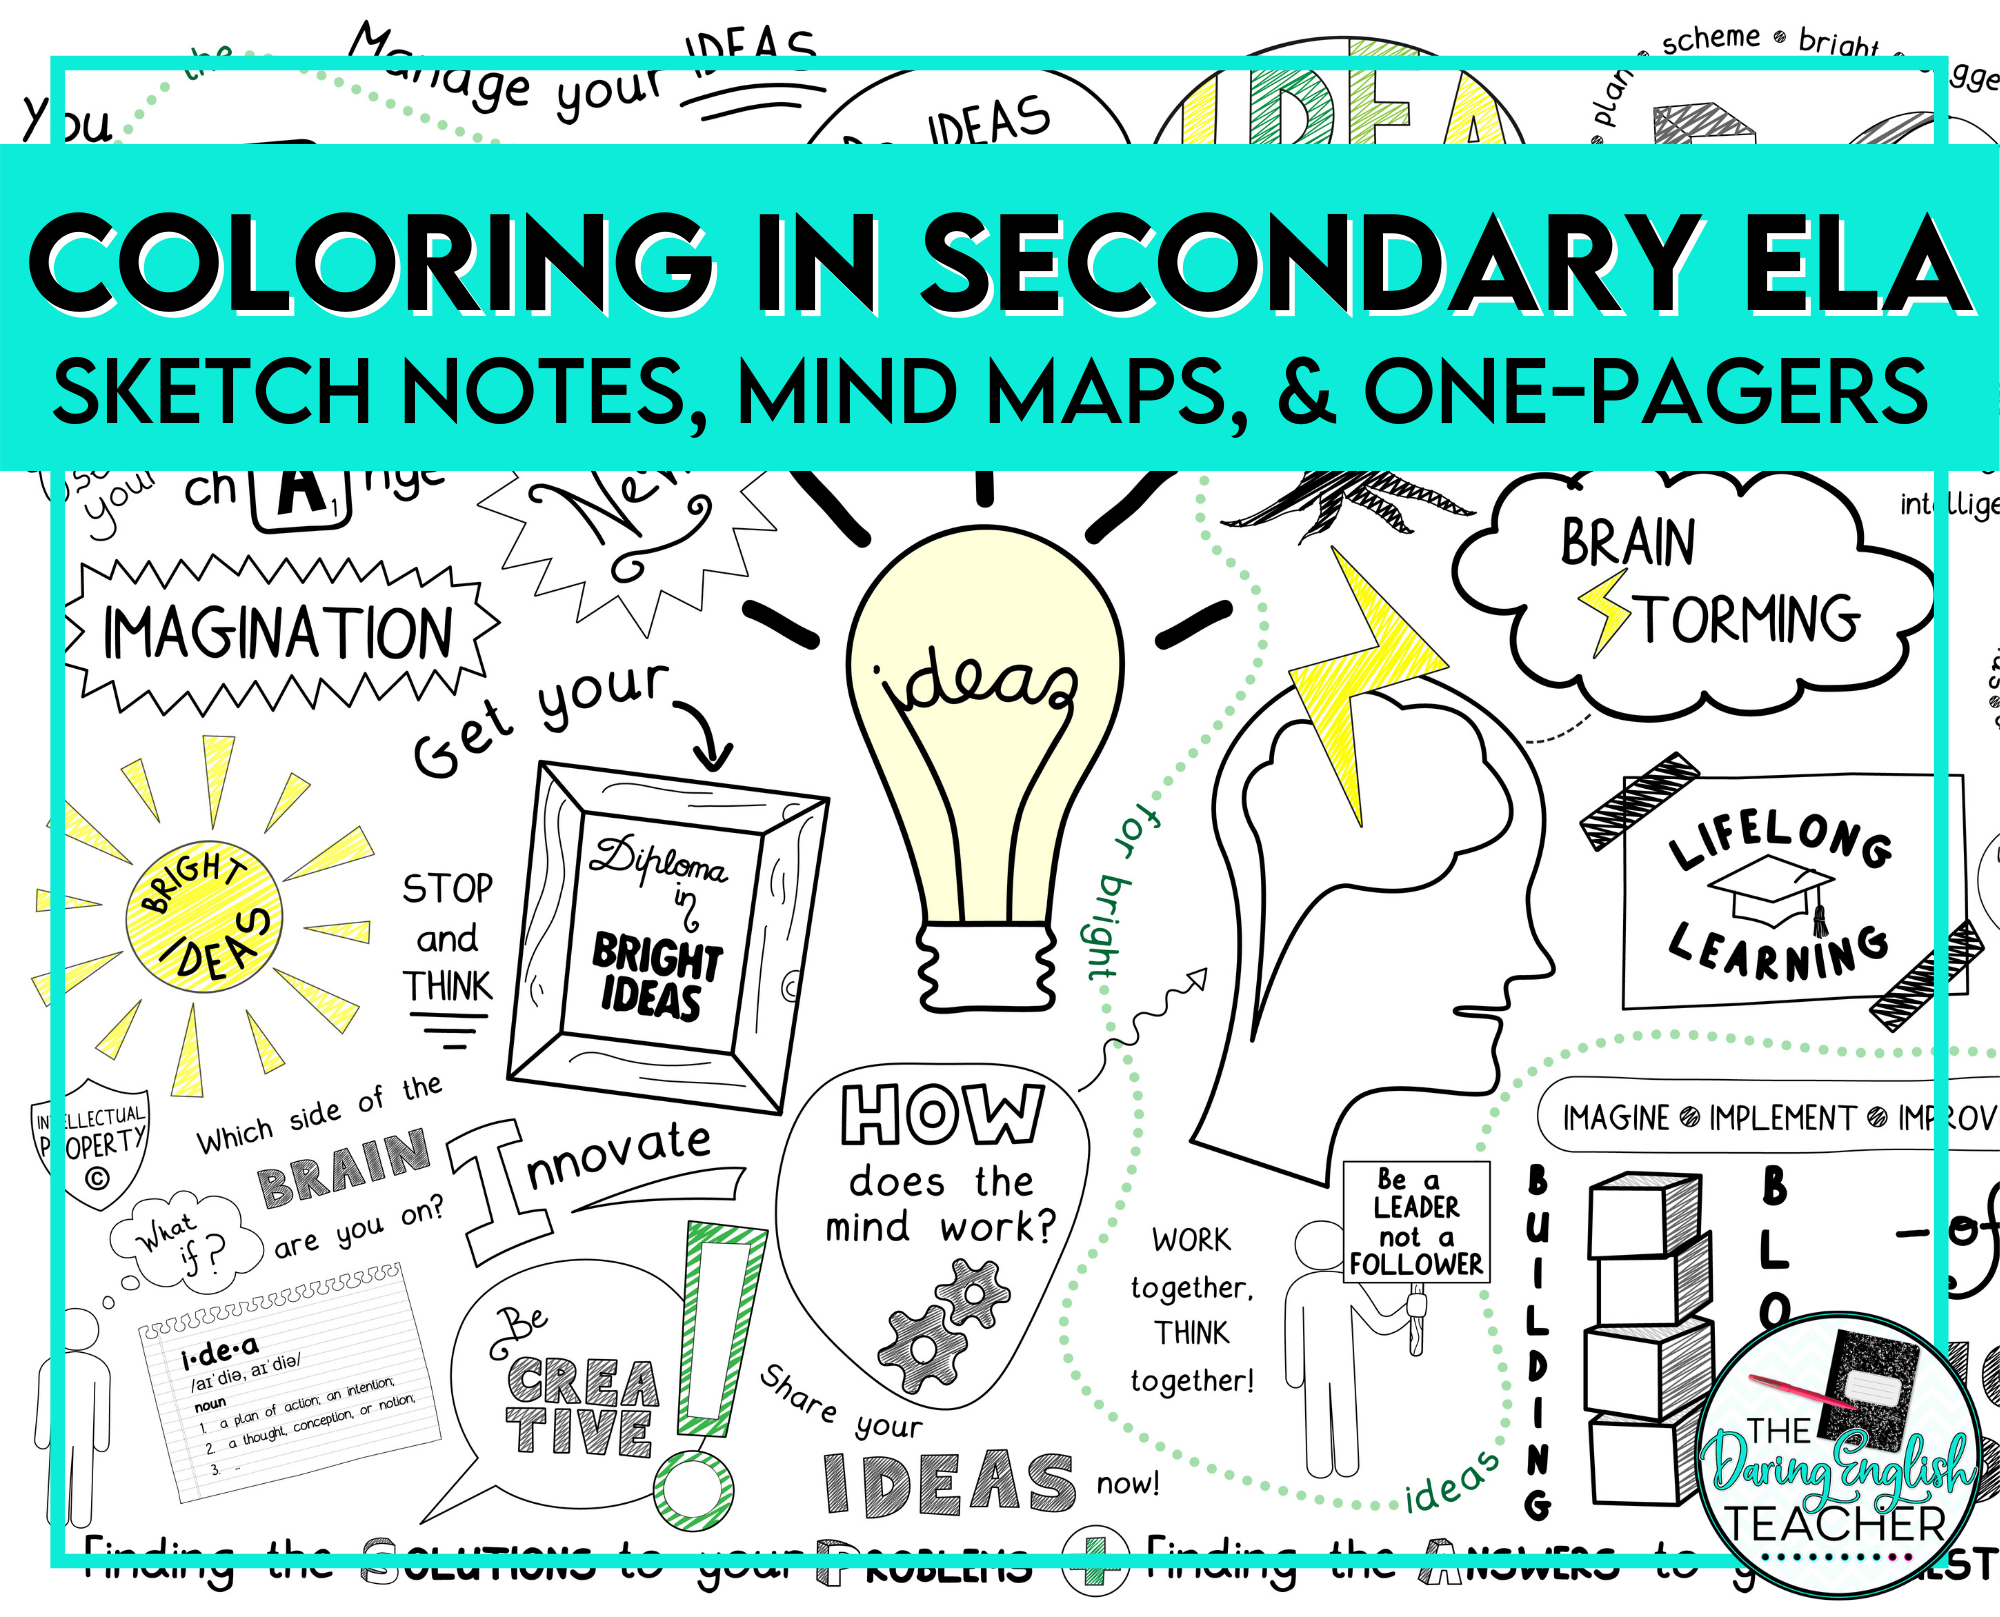 Coloring in Secondary ELA: sketch notes, mind maps, and one-pagers